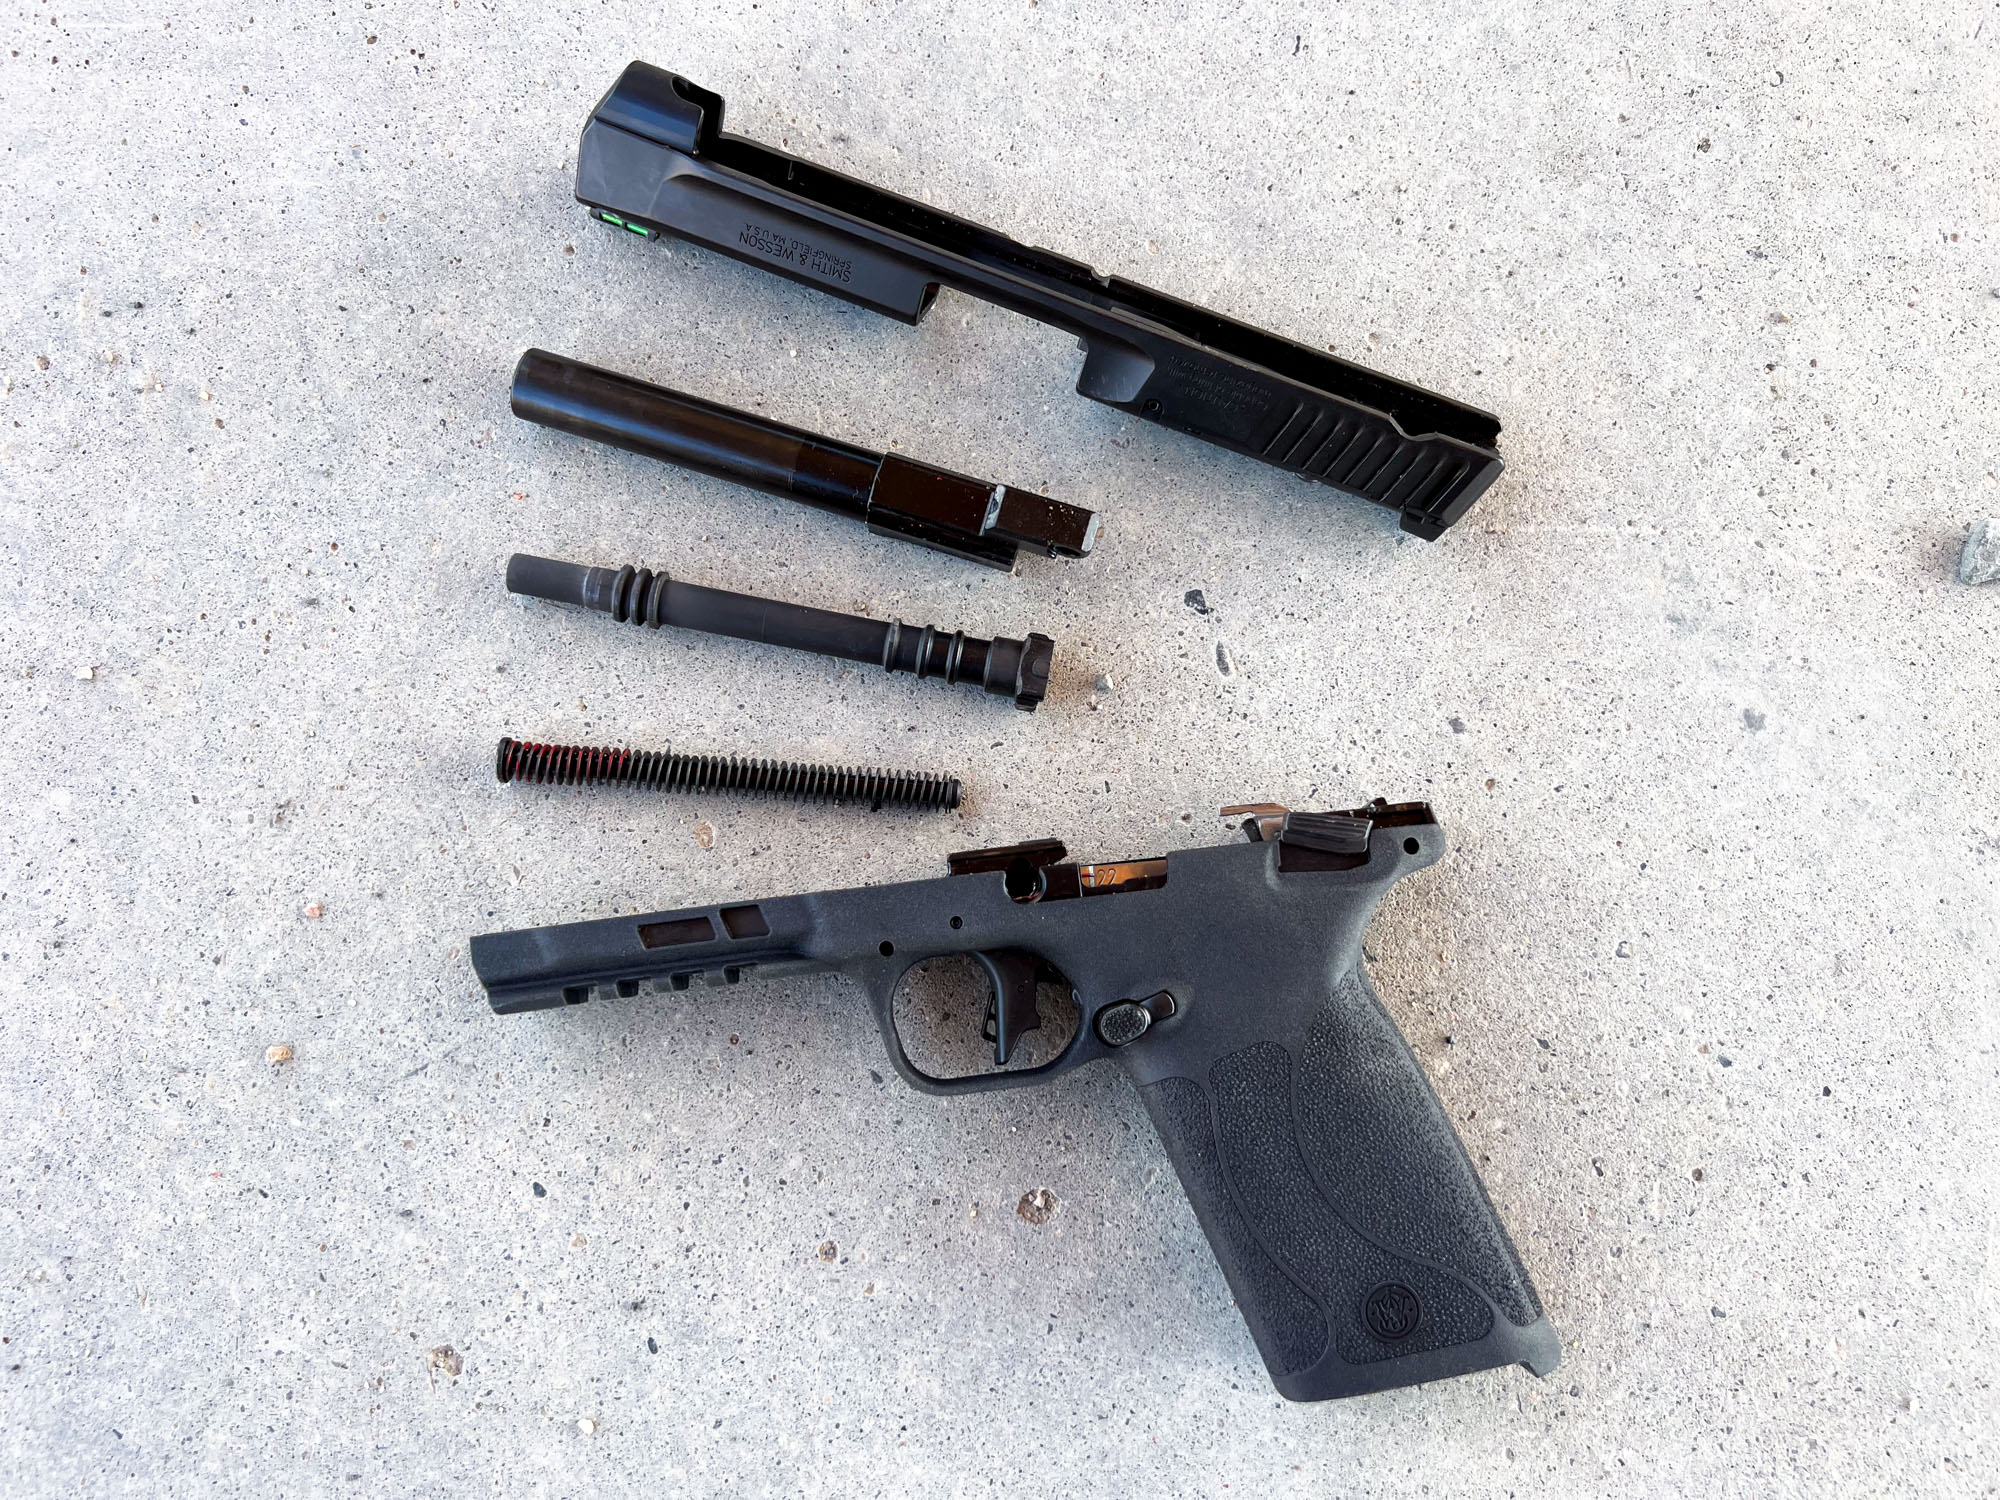 Smith & Wesson M&P 22 Magnum disassembled